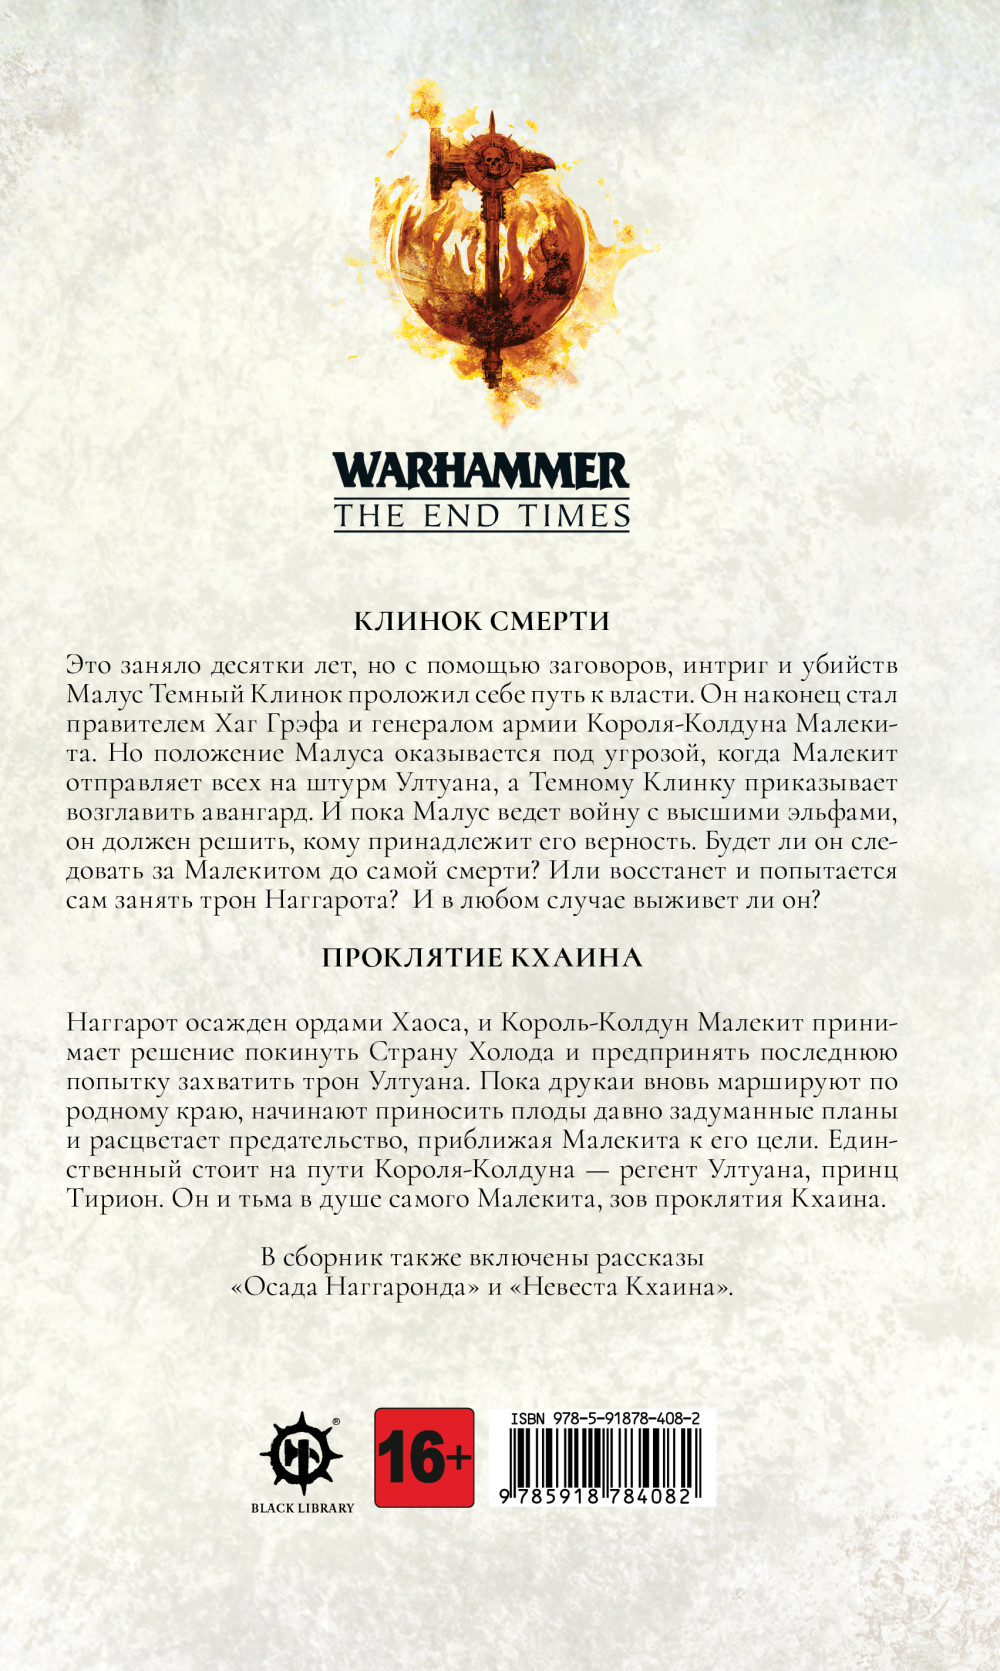 Warhammer: The End Times   